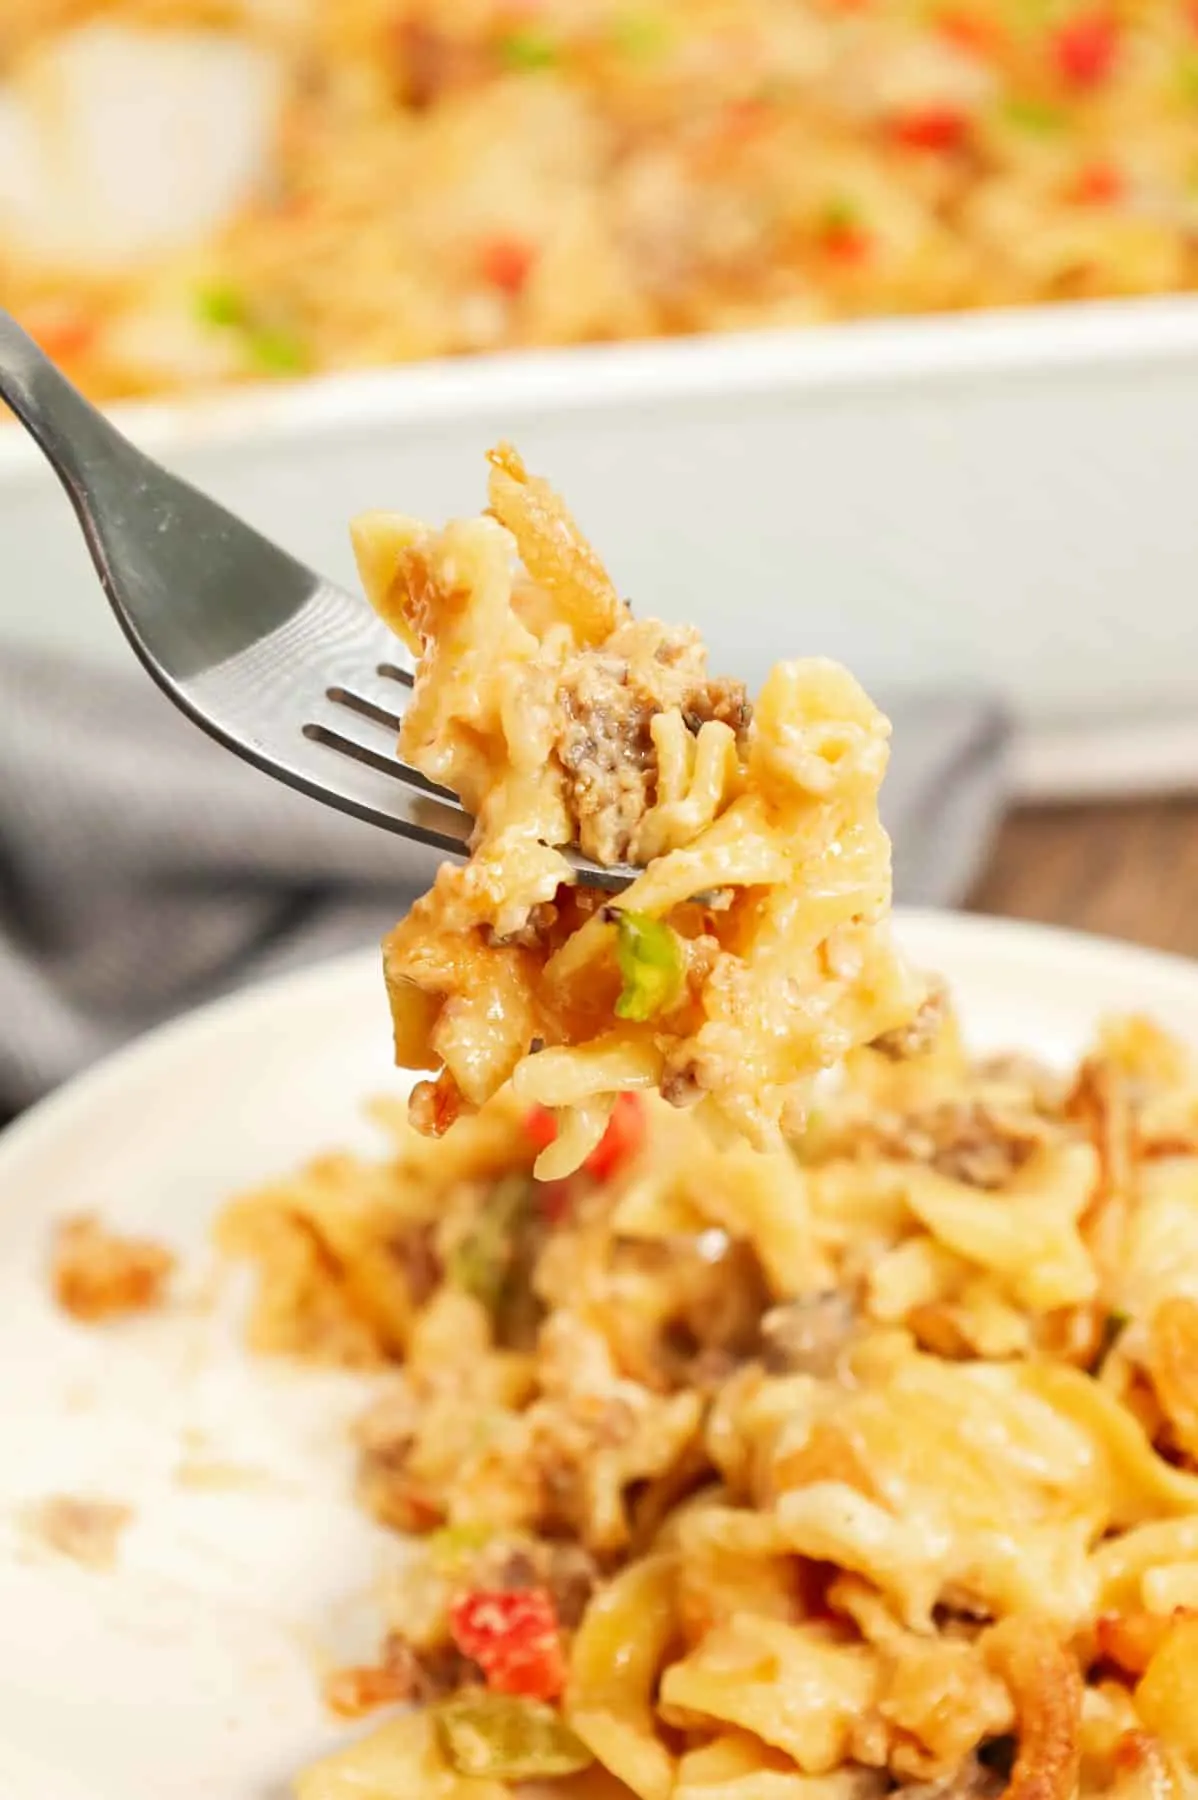 Sausage and Noodle Casserole is a hearty dinner recipe loaded with Italian sausage meat, egg noodle and diced bell peppers all tossed in a cream of mushroom and cream cheese mixture and baked with provolone cheese and French's crispy fried onions on top.